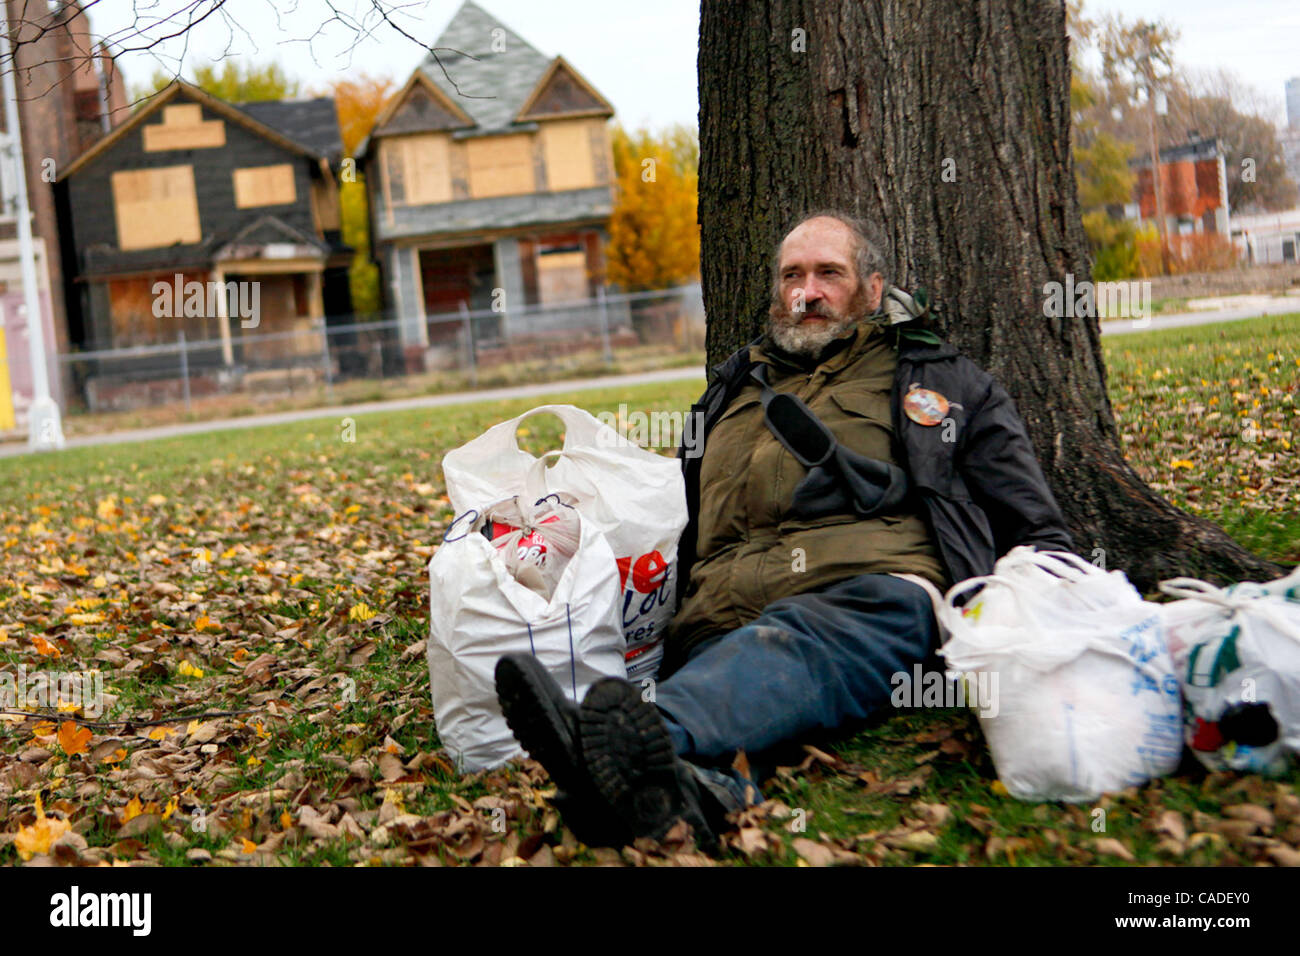 Sept 25, 2010 - Detroit, Michigan, U.S. - With his belongings by his side, Joseph sits in a park downtown. In the 1950's Detroit was the 5th most populated city in the United States, since then it has been falling down the ranks, in 2008 Detroit became 11th most populated city. Of the nearly 400,000 Stock Photo